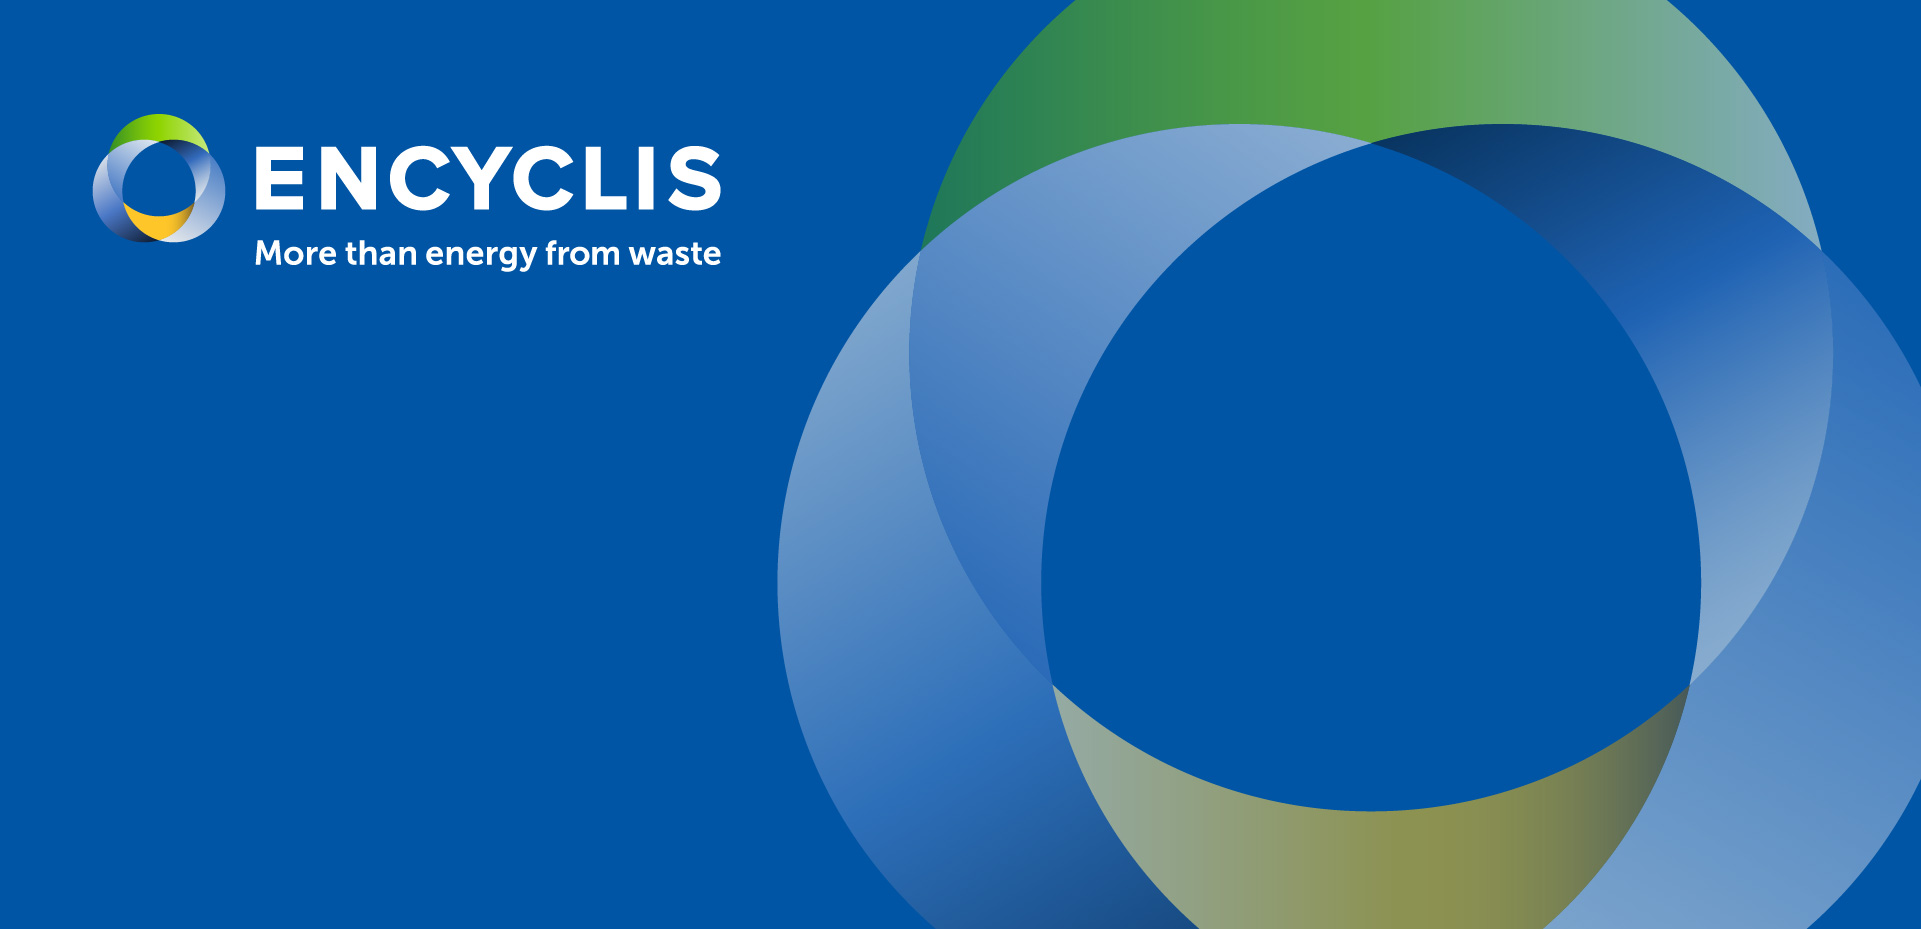 Introducing Encyclis, the new name for Covanta Europe.